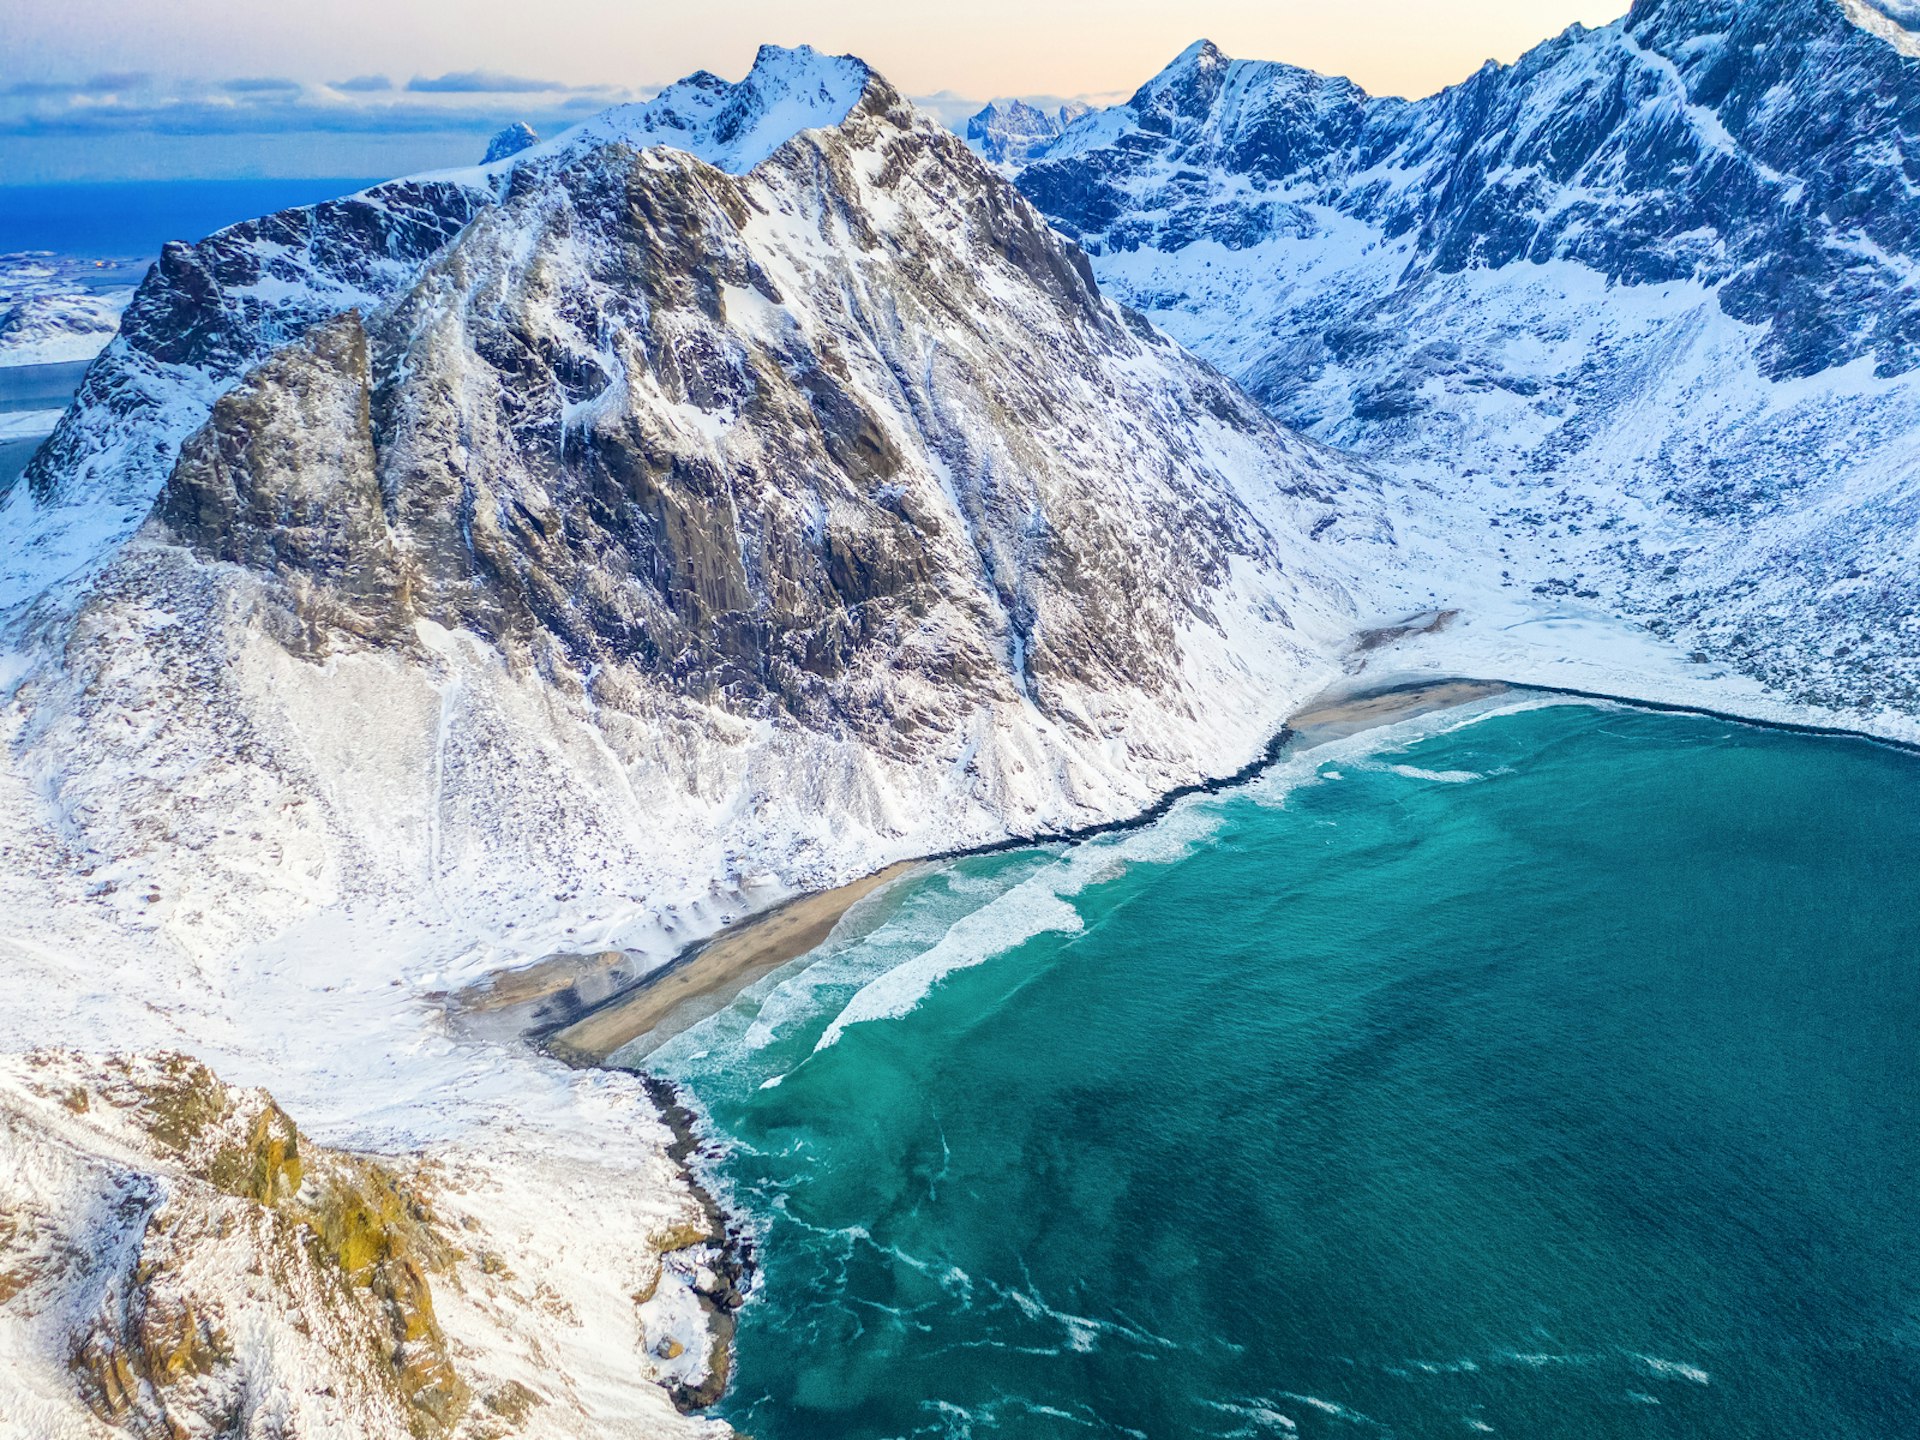 An aerial shot over the snowy mountains and bright-blue waters of Kvalvika Beach